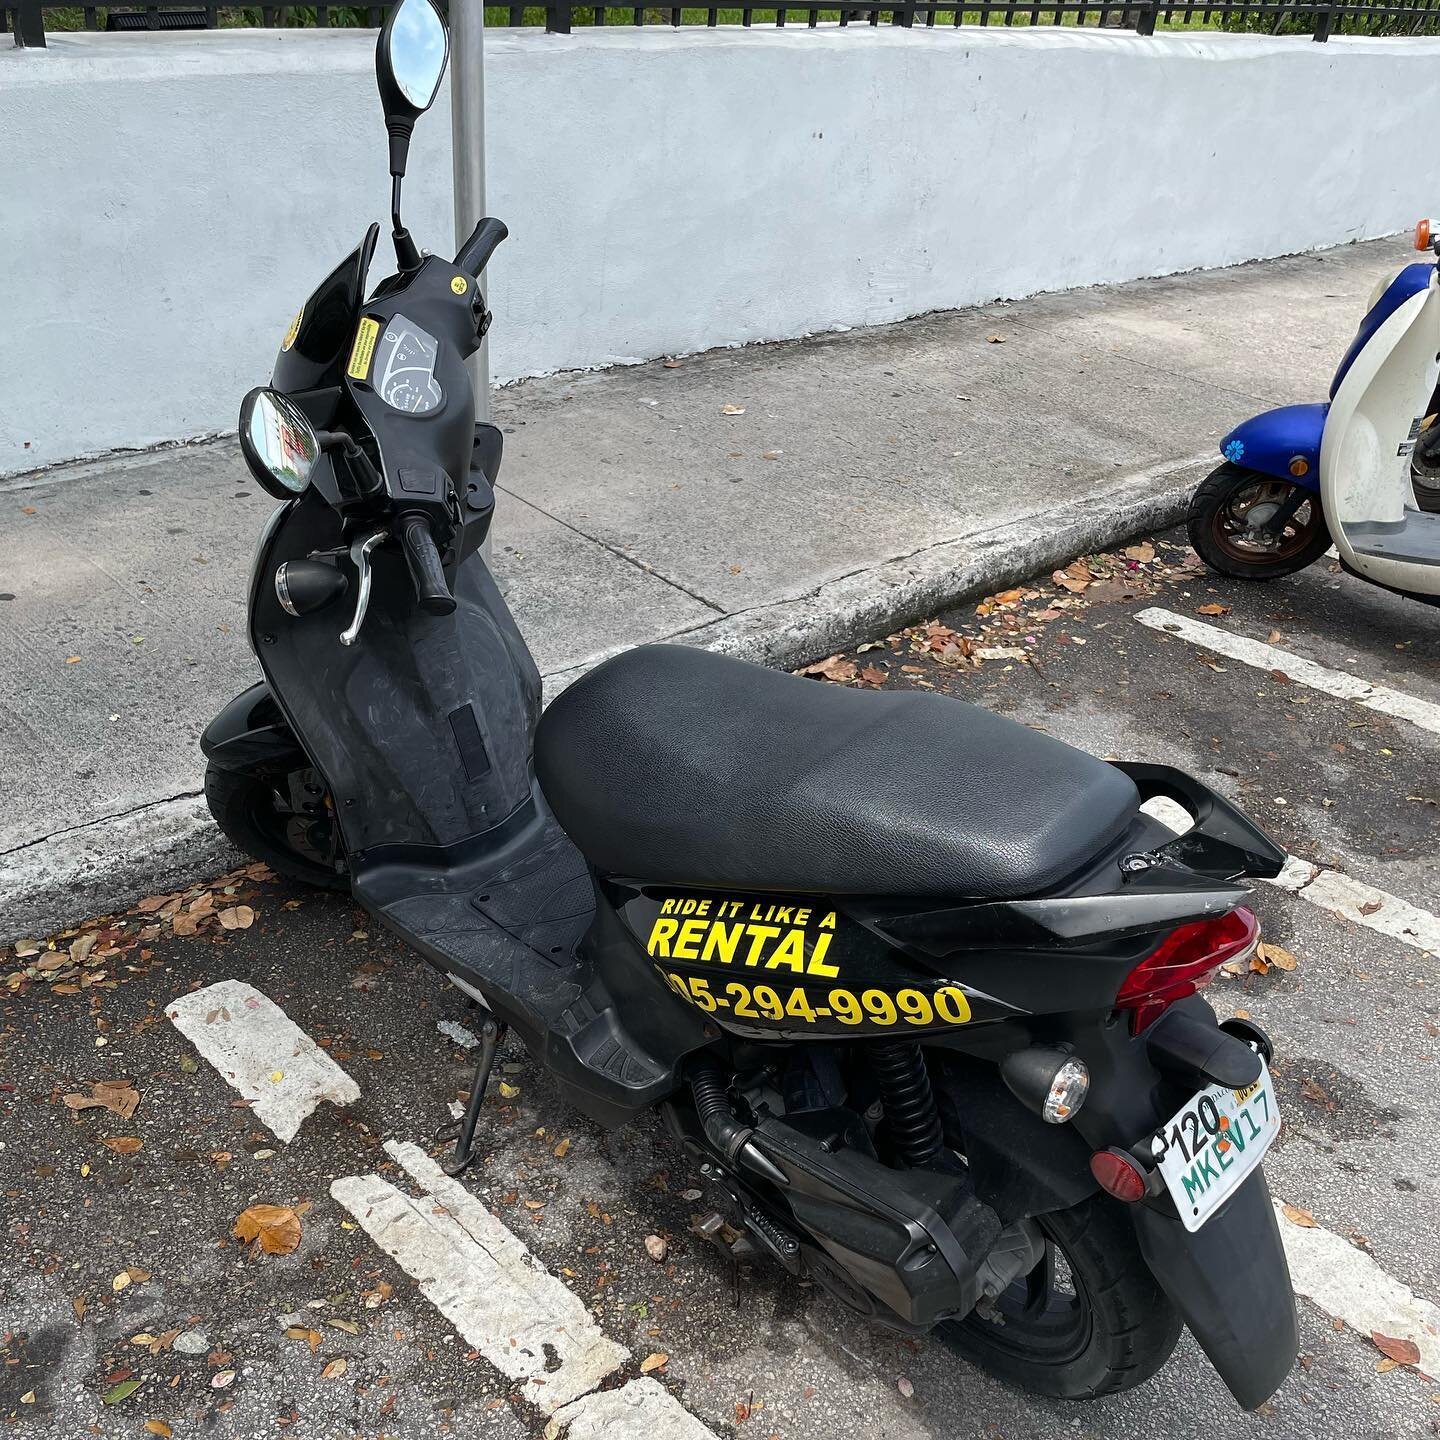 My wheels while in Key West. Brought back my motorcycle days which I miss.